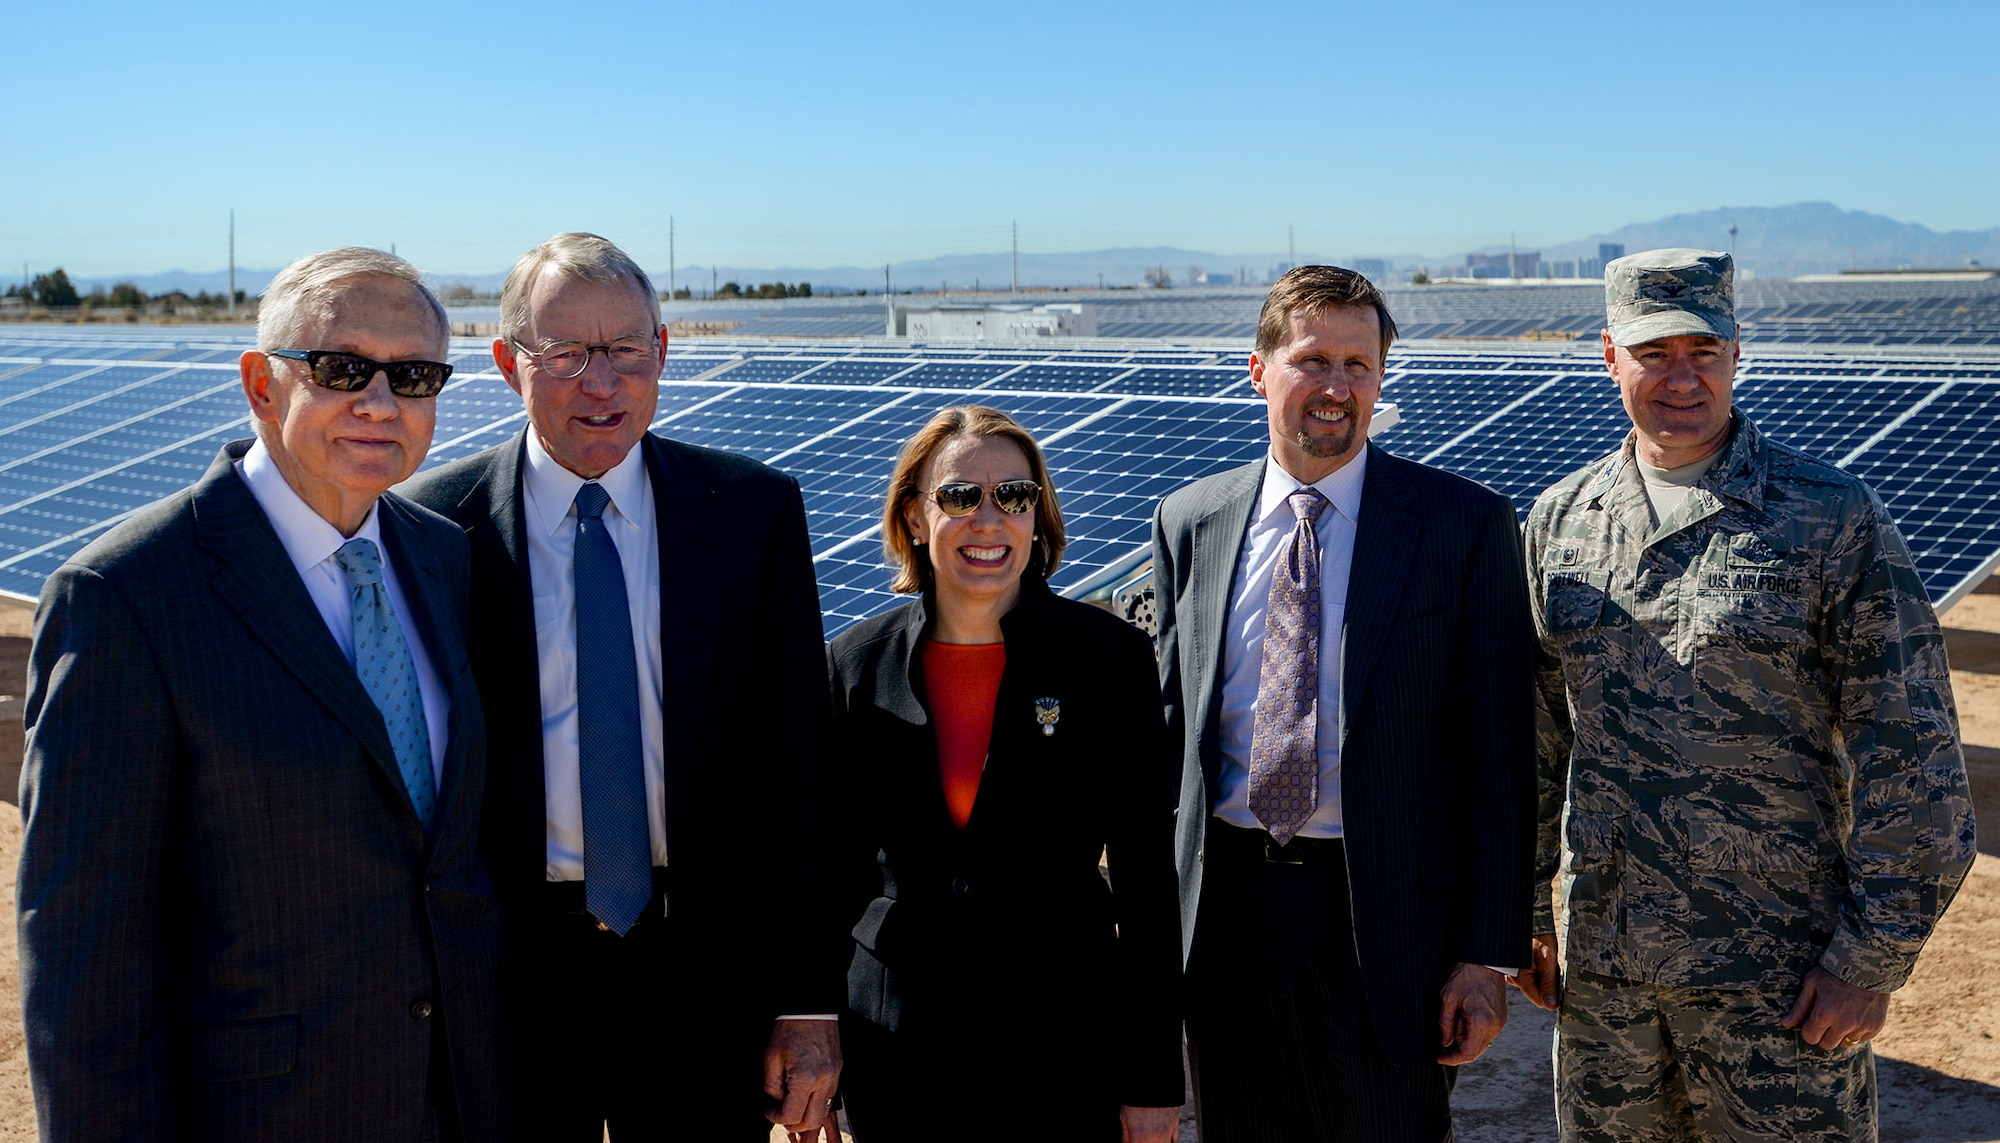 From left to right, Sen. Harry Reid; Paul Caudill, NV Energy CEO; Miranda A.A. Ballentine, Assistant Secretary of the Air Force for Installations, Environment and Energy; Tom Werner, SunPower Corp. CEO; and Col. Richard Boutwell, 99th Air Base Wing commander, pose for a photo at the Nellis Solar Array II Feb. 16, 2016, Nellis Air Force Base, Nev. The U.S. Air Force unveiled the new array during a dedication ceremony on base. (U.S. Air Force photo by Airman 1st Class Kevin Tanenbaum) 